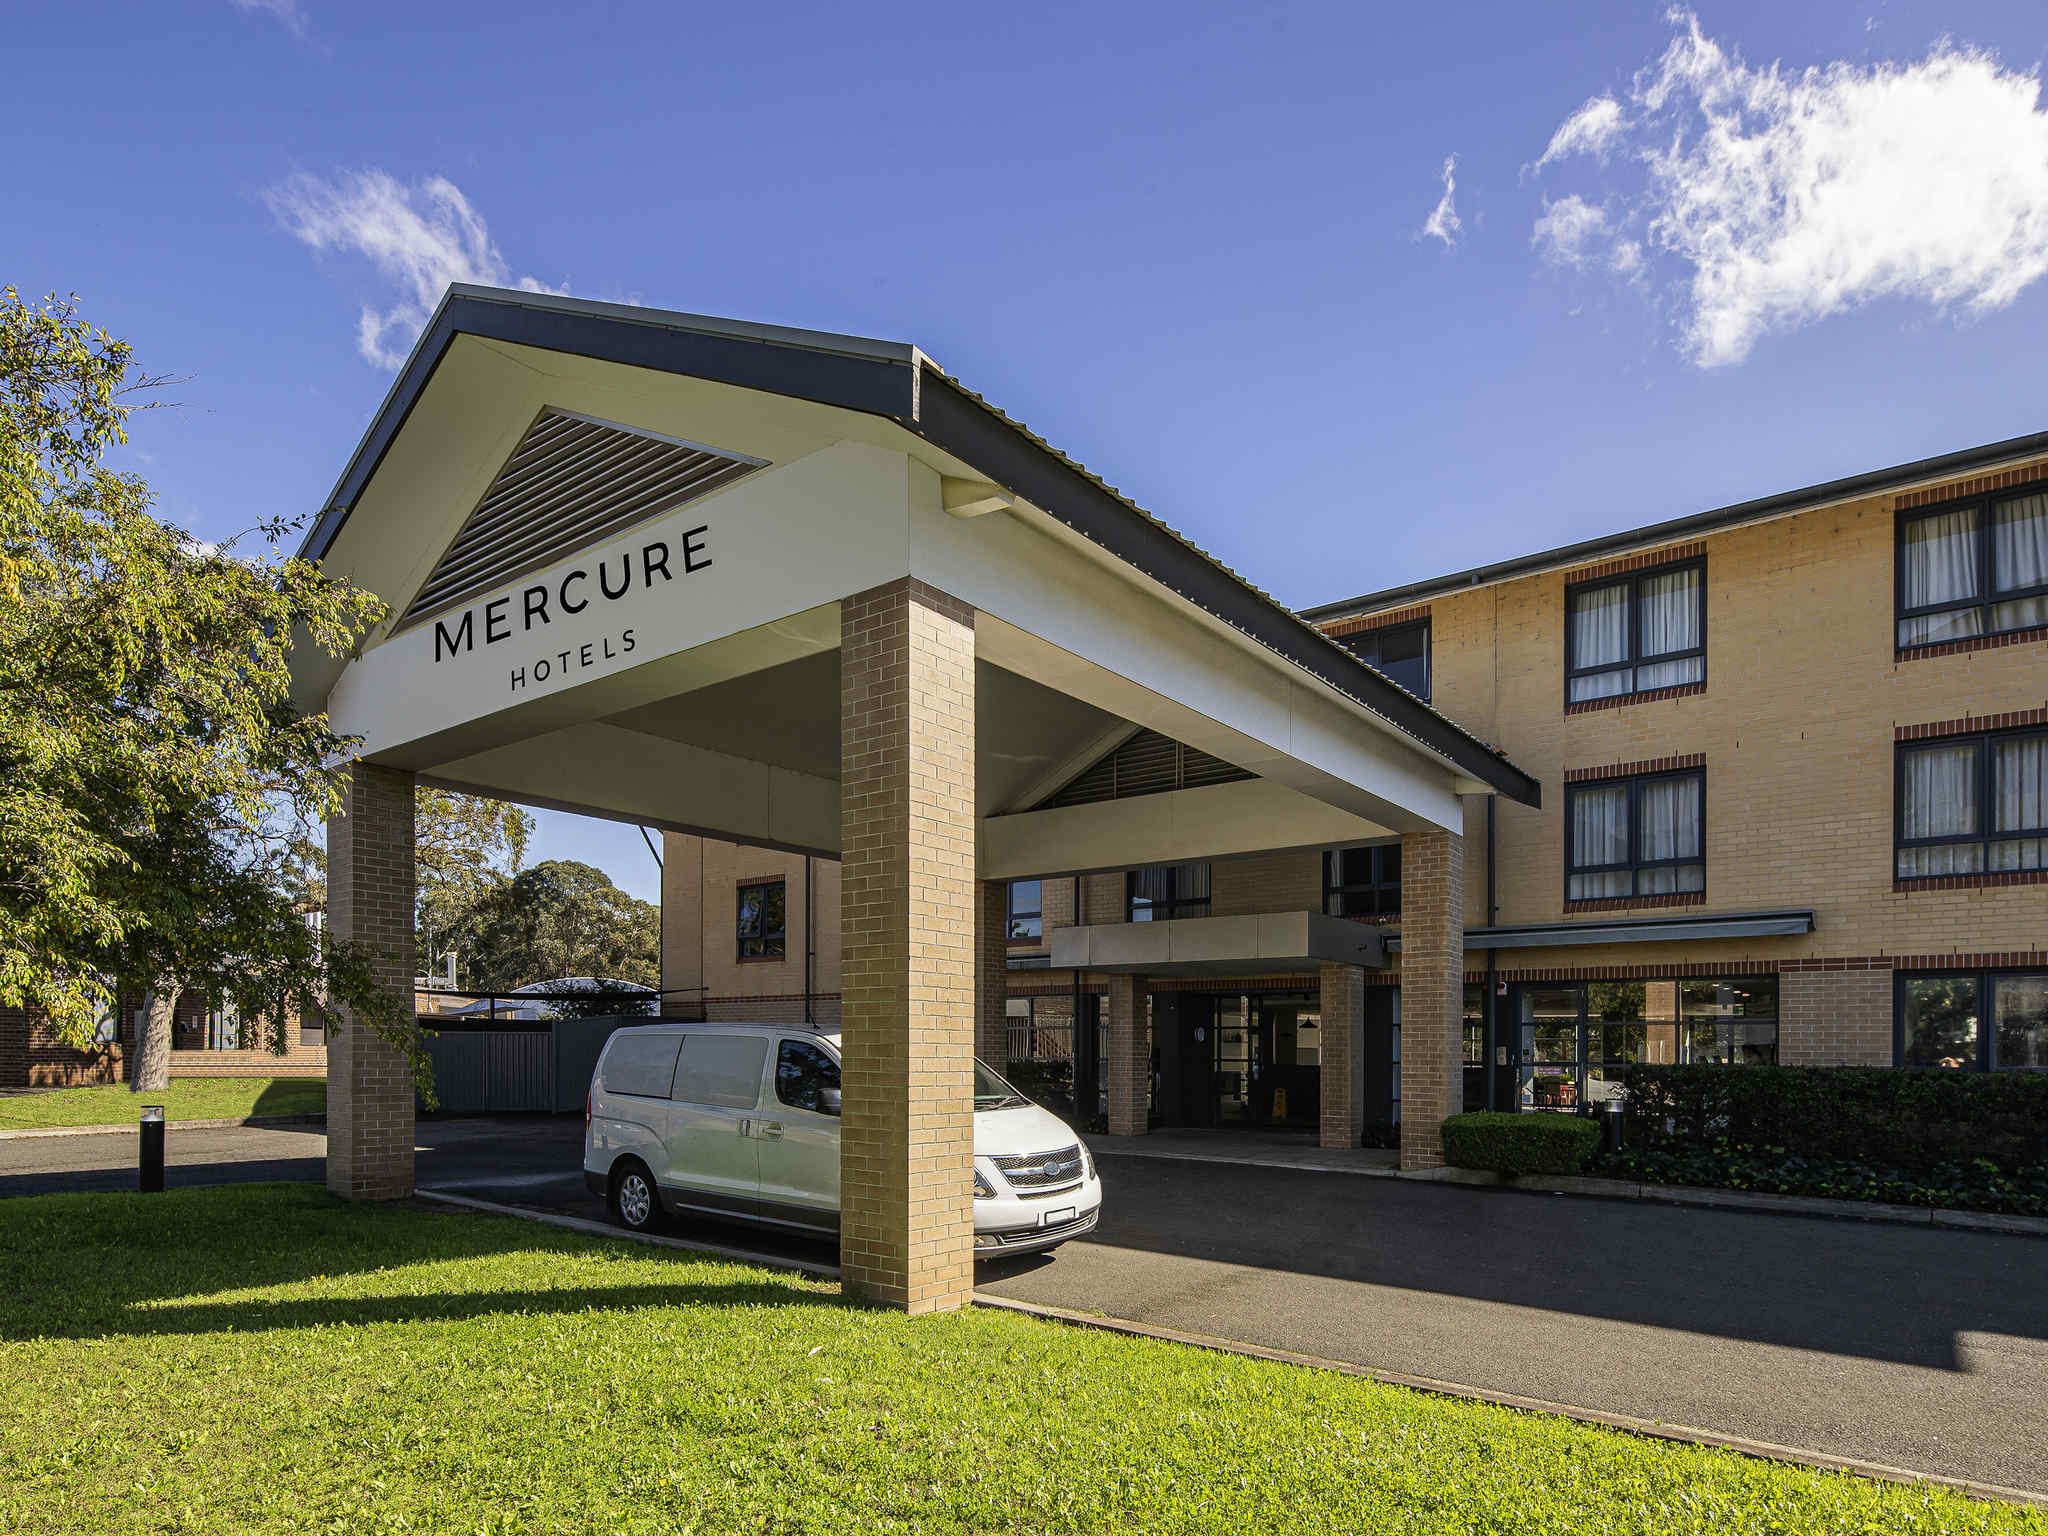 An image of the front of the Mercure Sydney Macquaire Park Hotel.